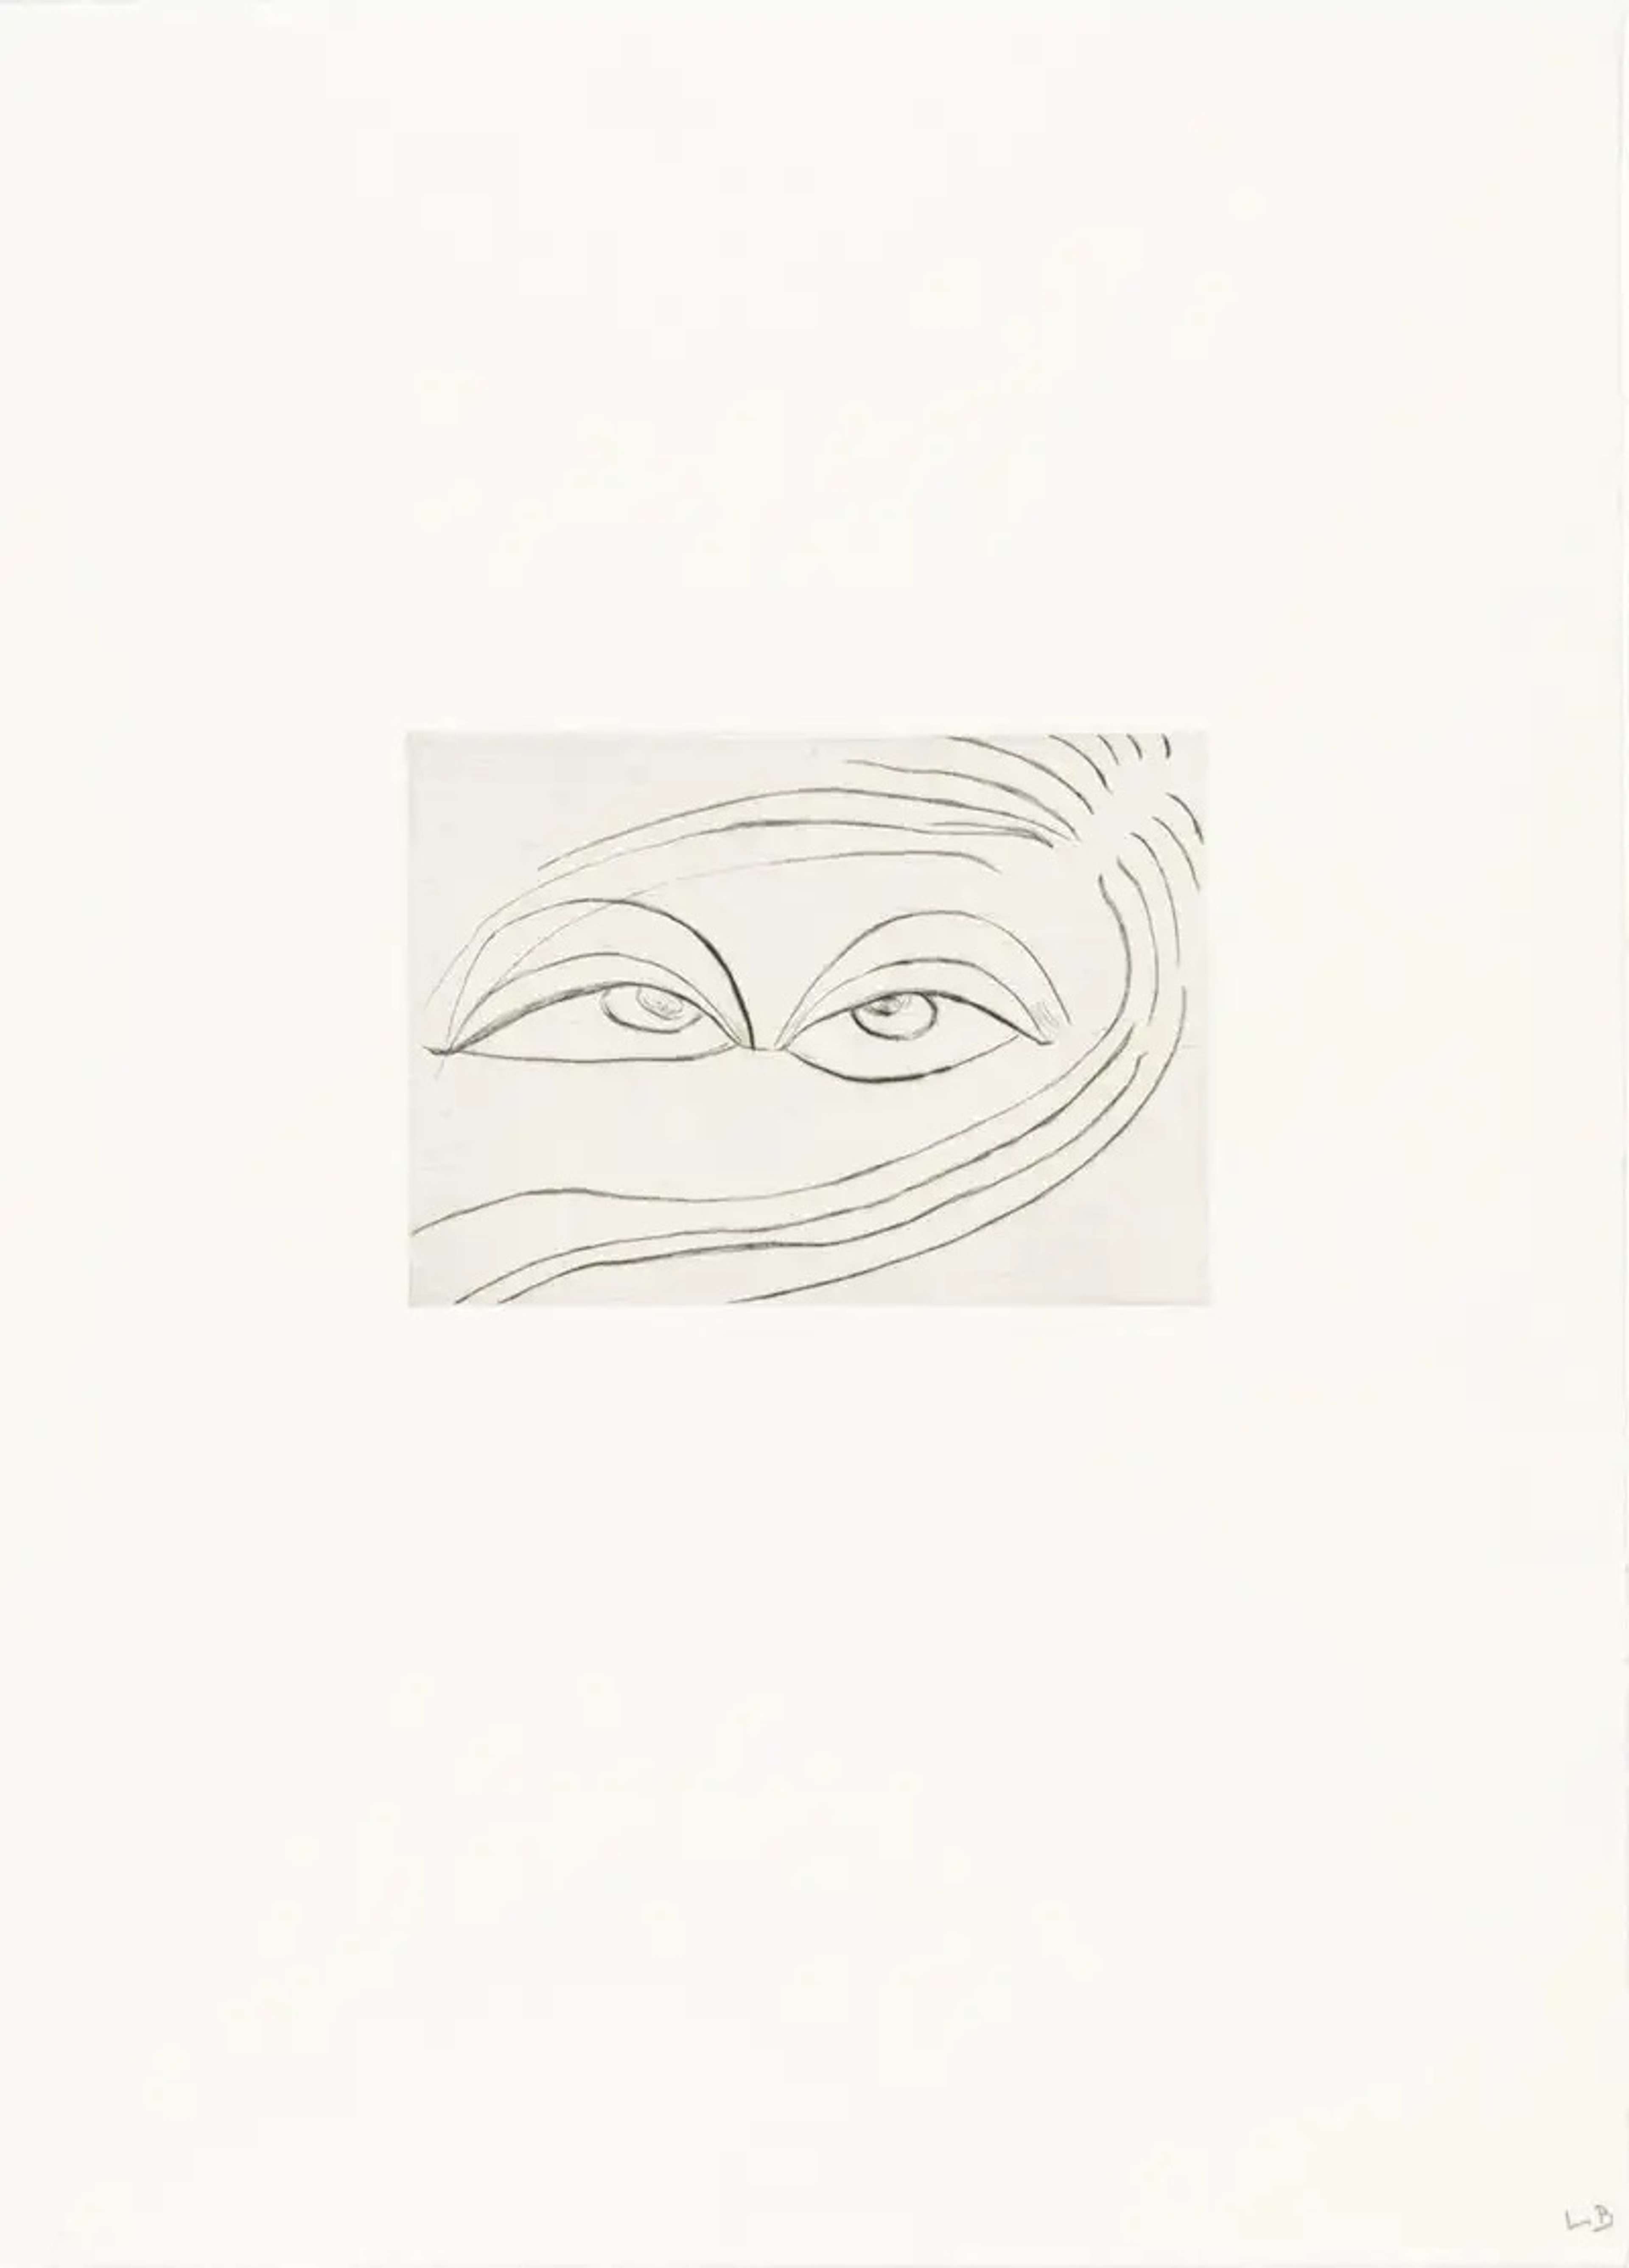 Louise Bourgeois Untitled No. 2. A monochromatic etching of an anatomical depiction of two eyes and strands of hair swooped in front of it. 